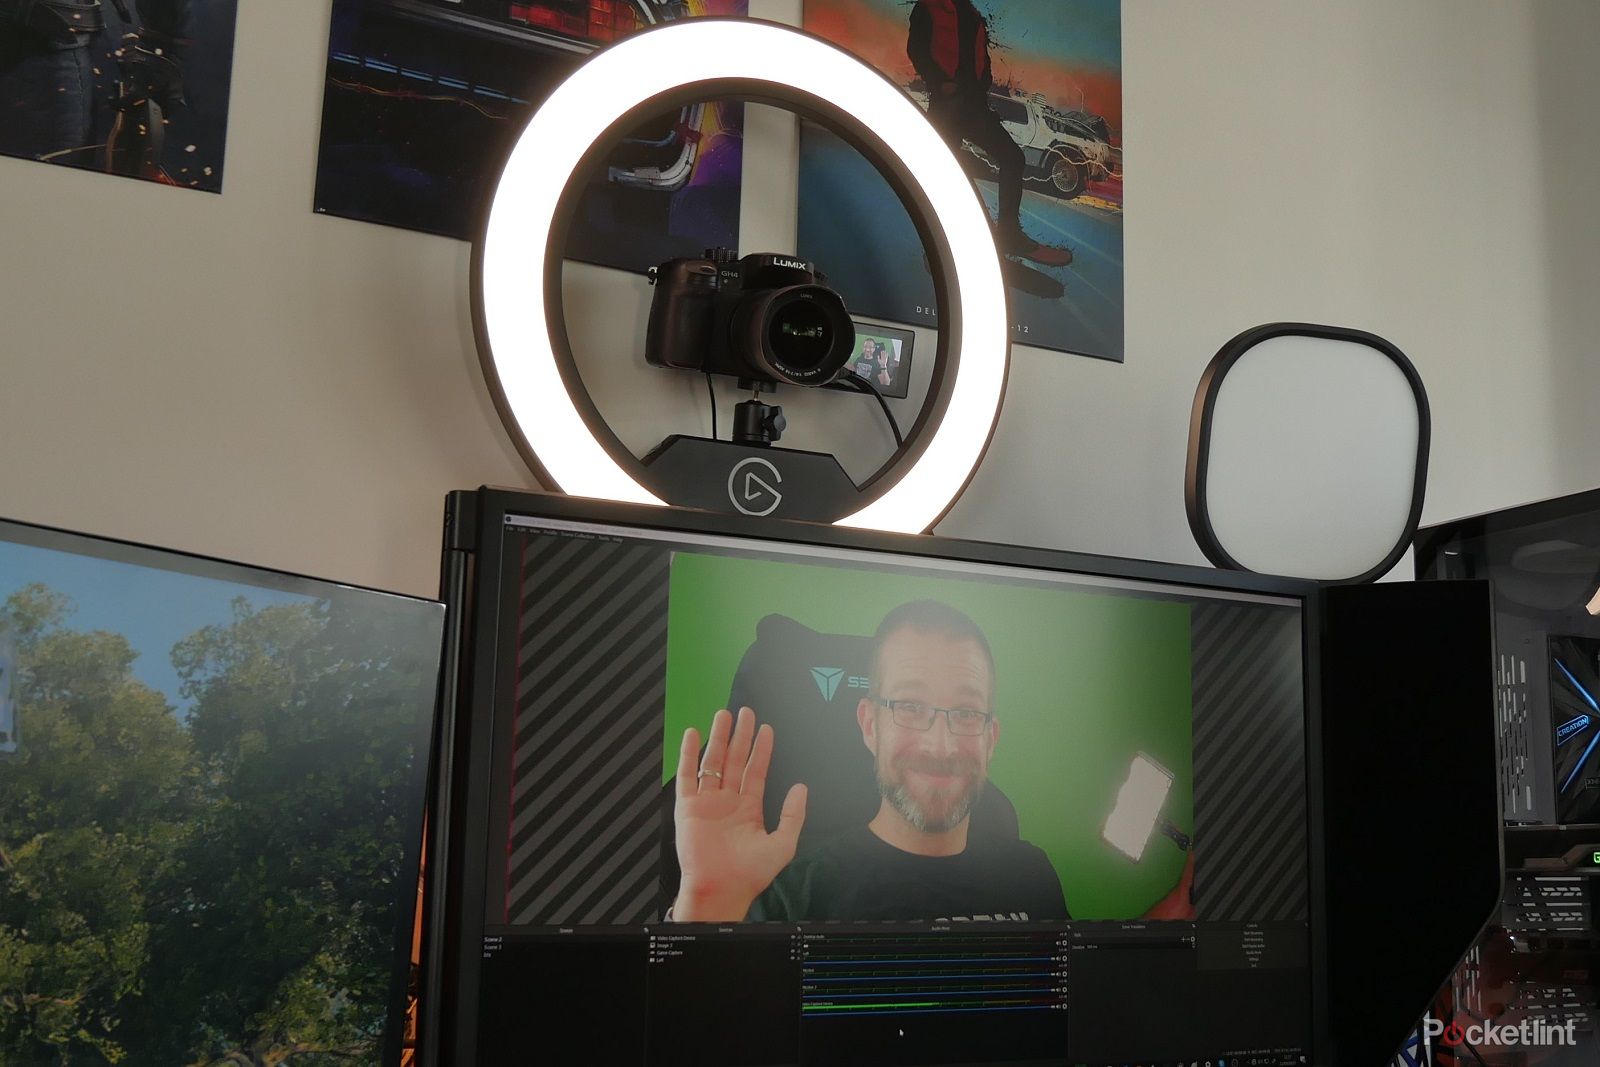 How to Use DSLR as a Webcam for Live Streaming